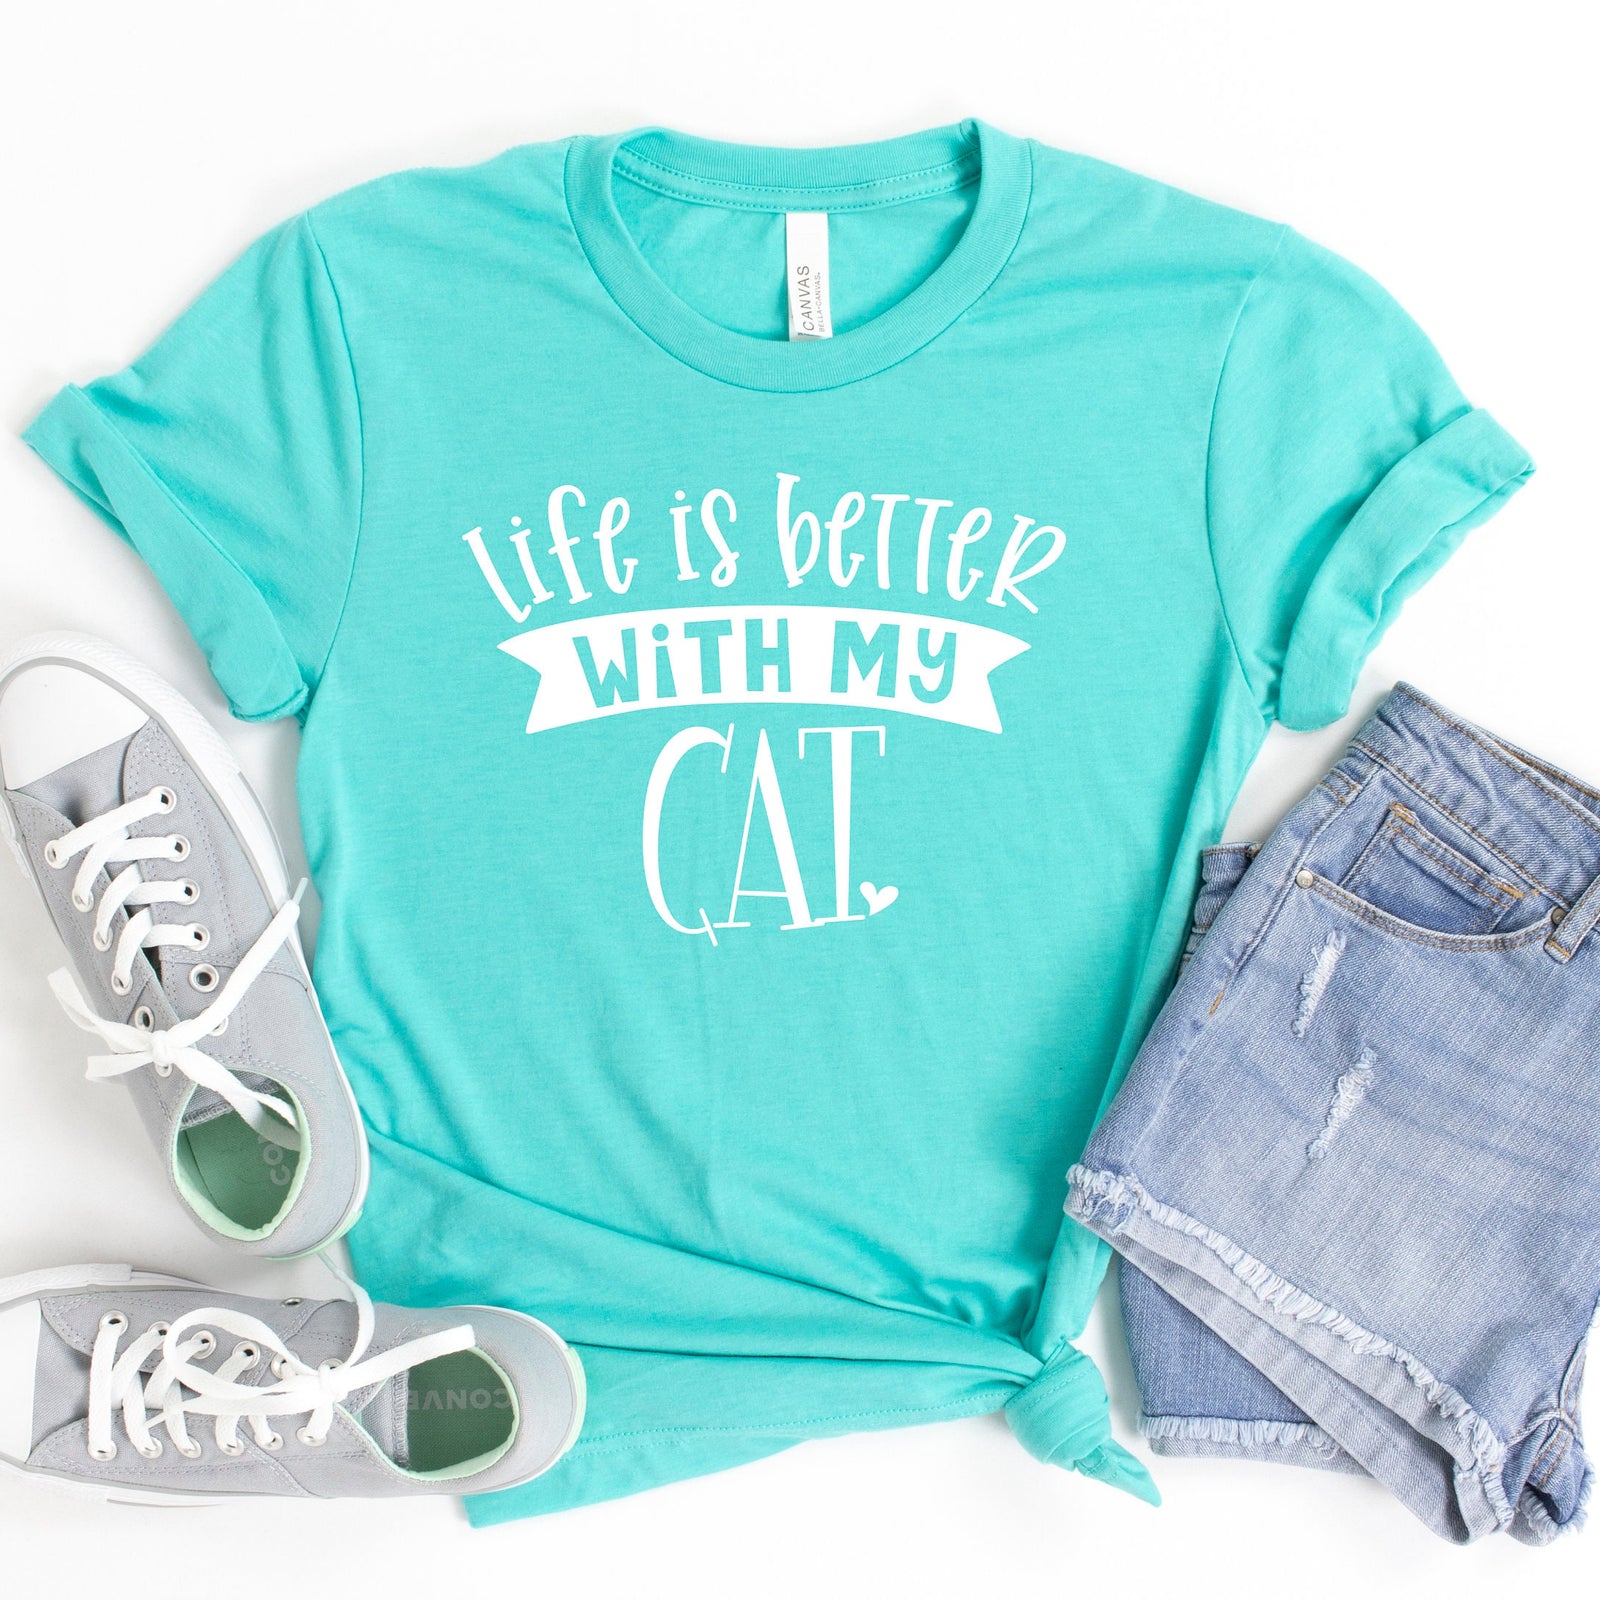 Life is Better with My Cat T Shirt - Cat Lover - Pet Rescue T Shirt - Funny Cat Mom Shirt